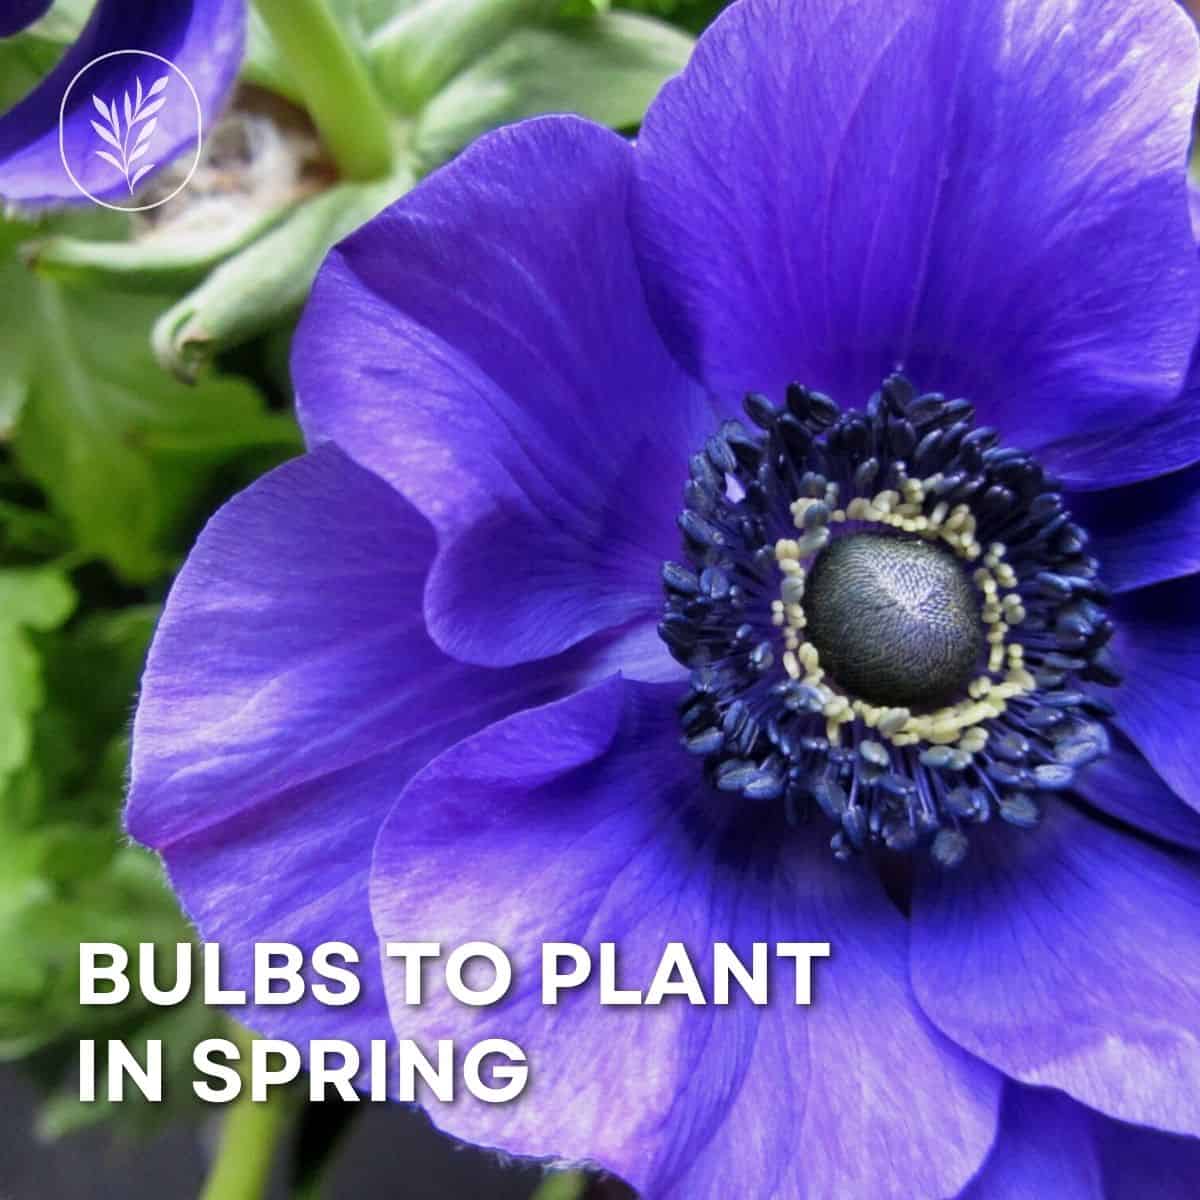 Bulbs to plant in spring via @home4theharvest